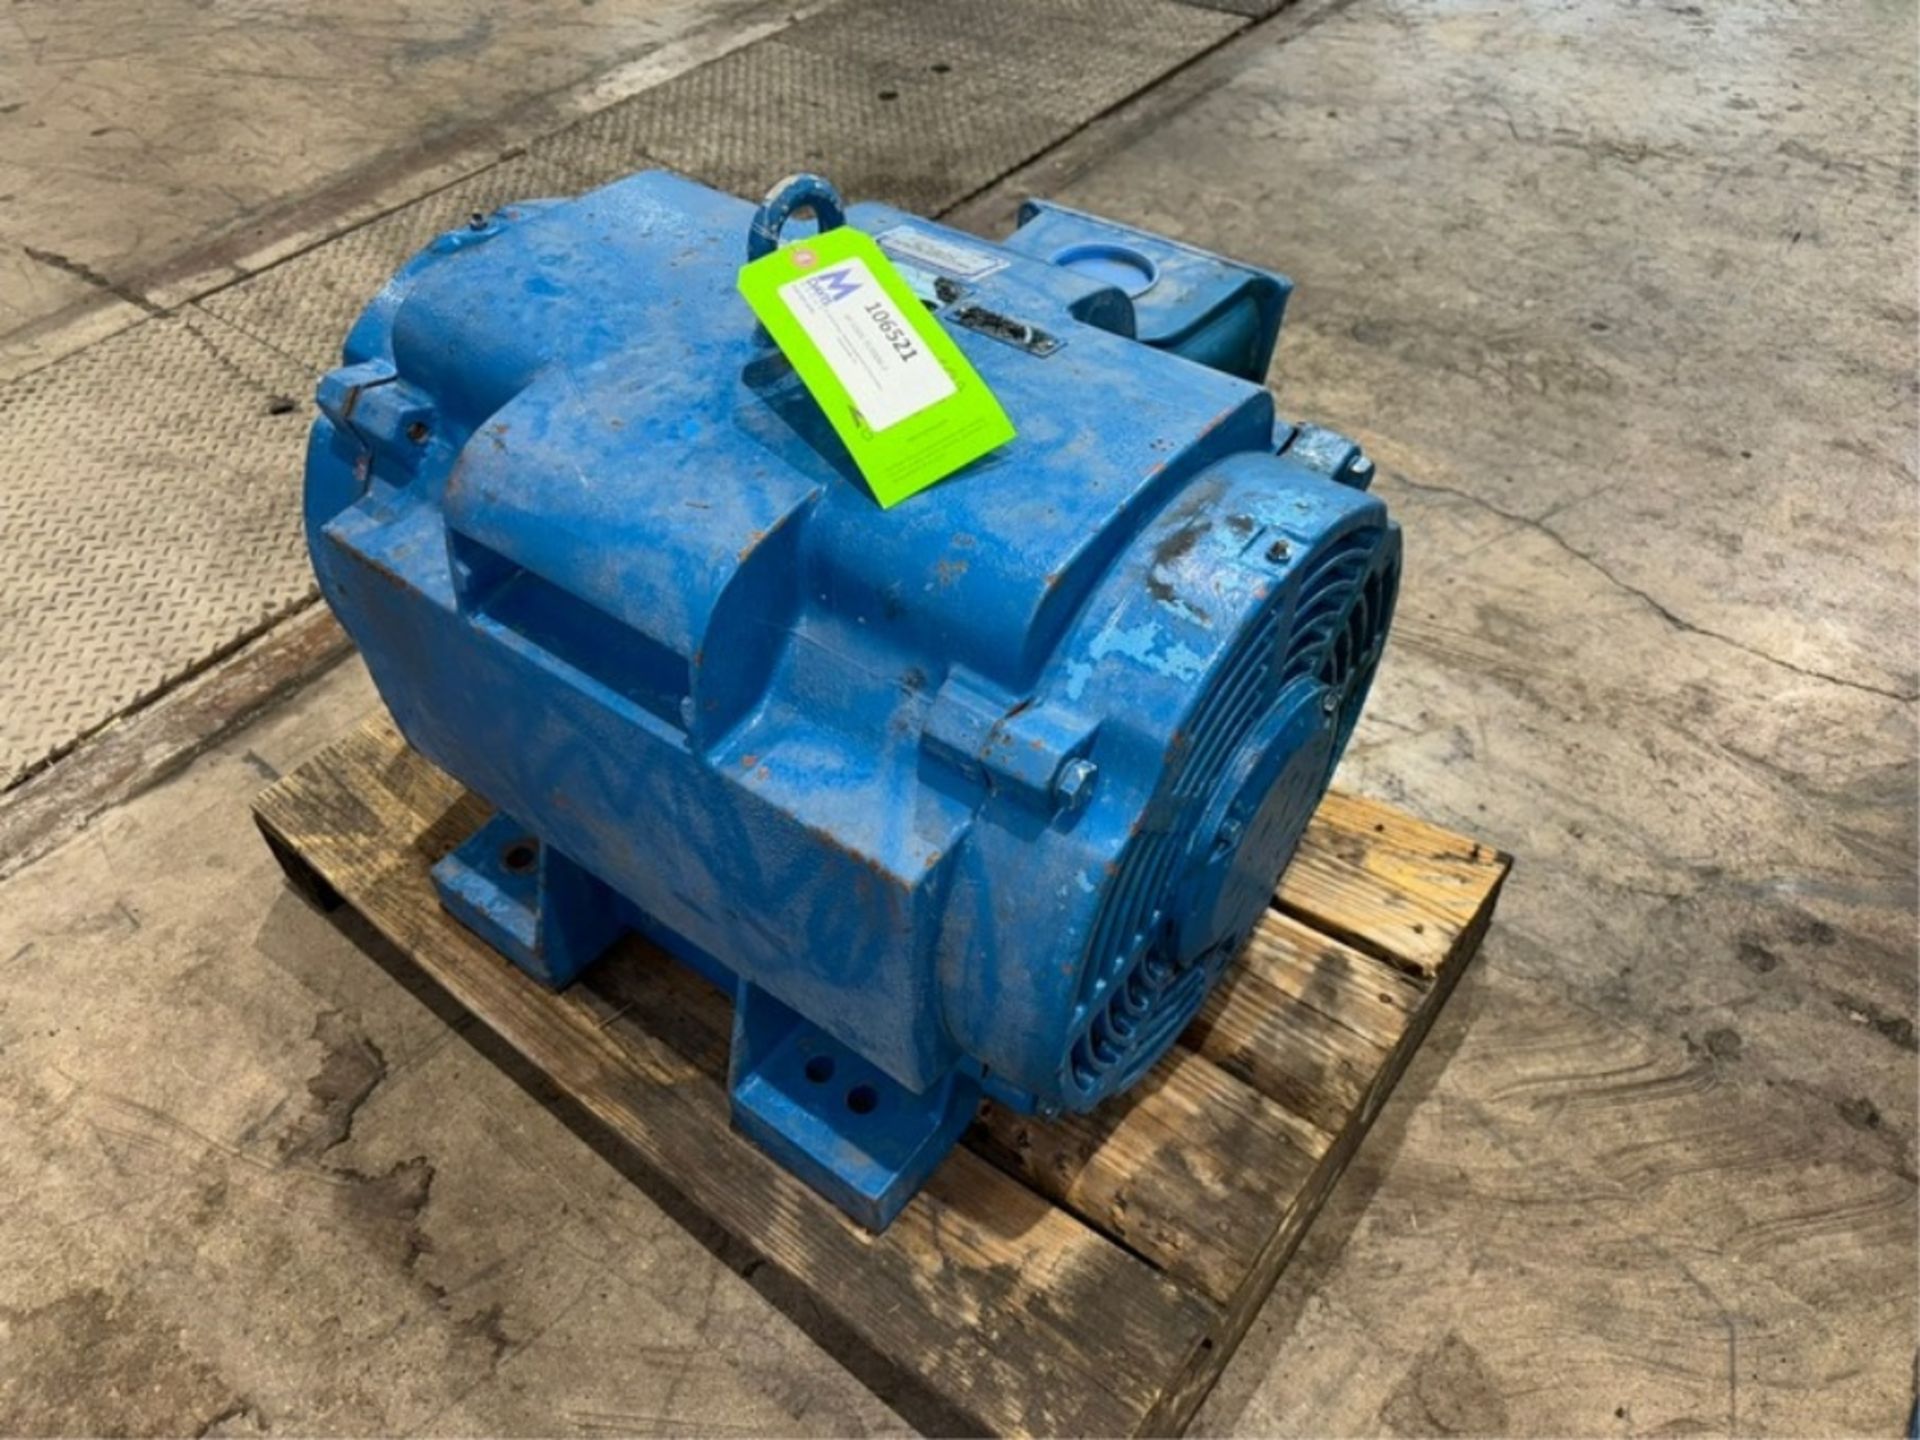 WEG 100 hp Motor, 208-230/460 Volts, 3 Phase, 1775 RPM (INV. #106521) (LOCATED MONROEVILLE, PA) ( - Image 6 of 6